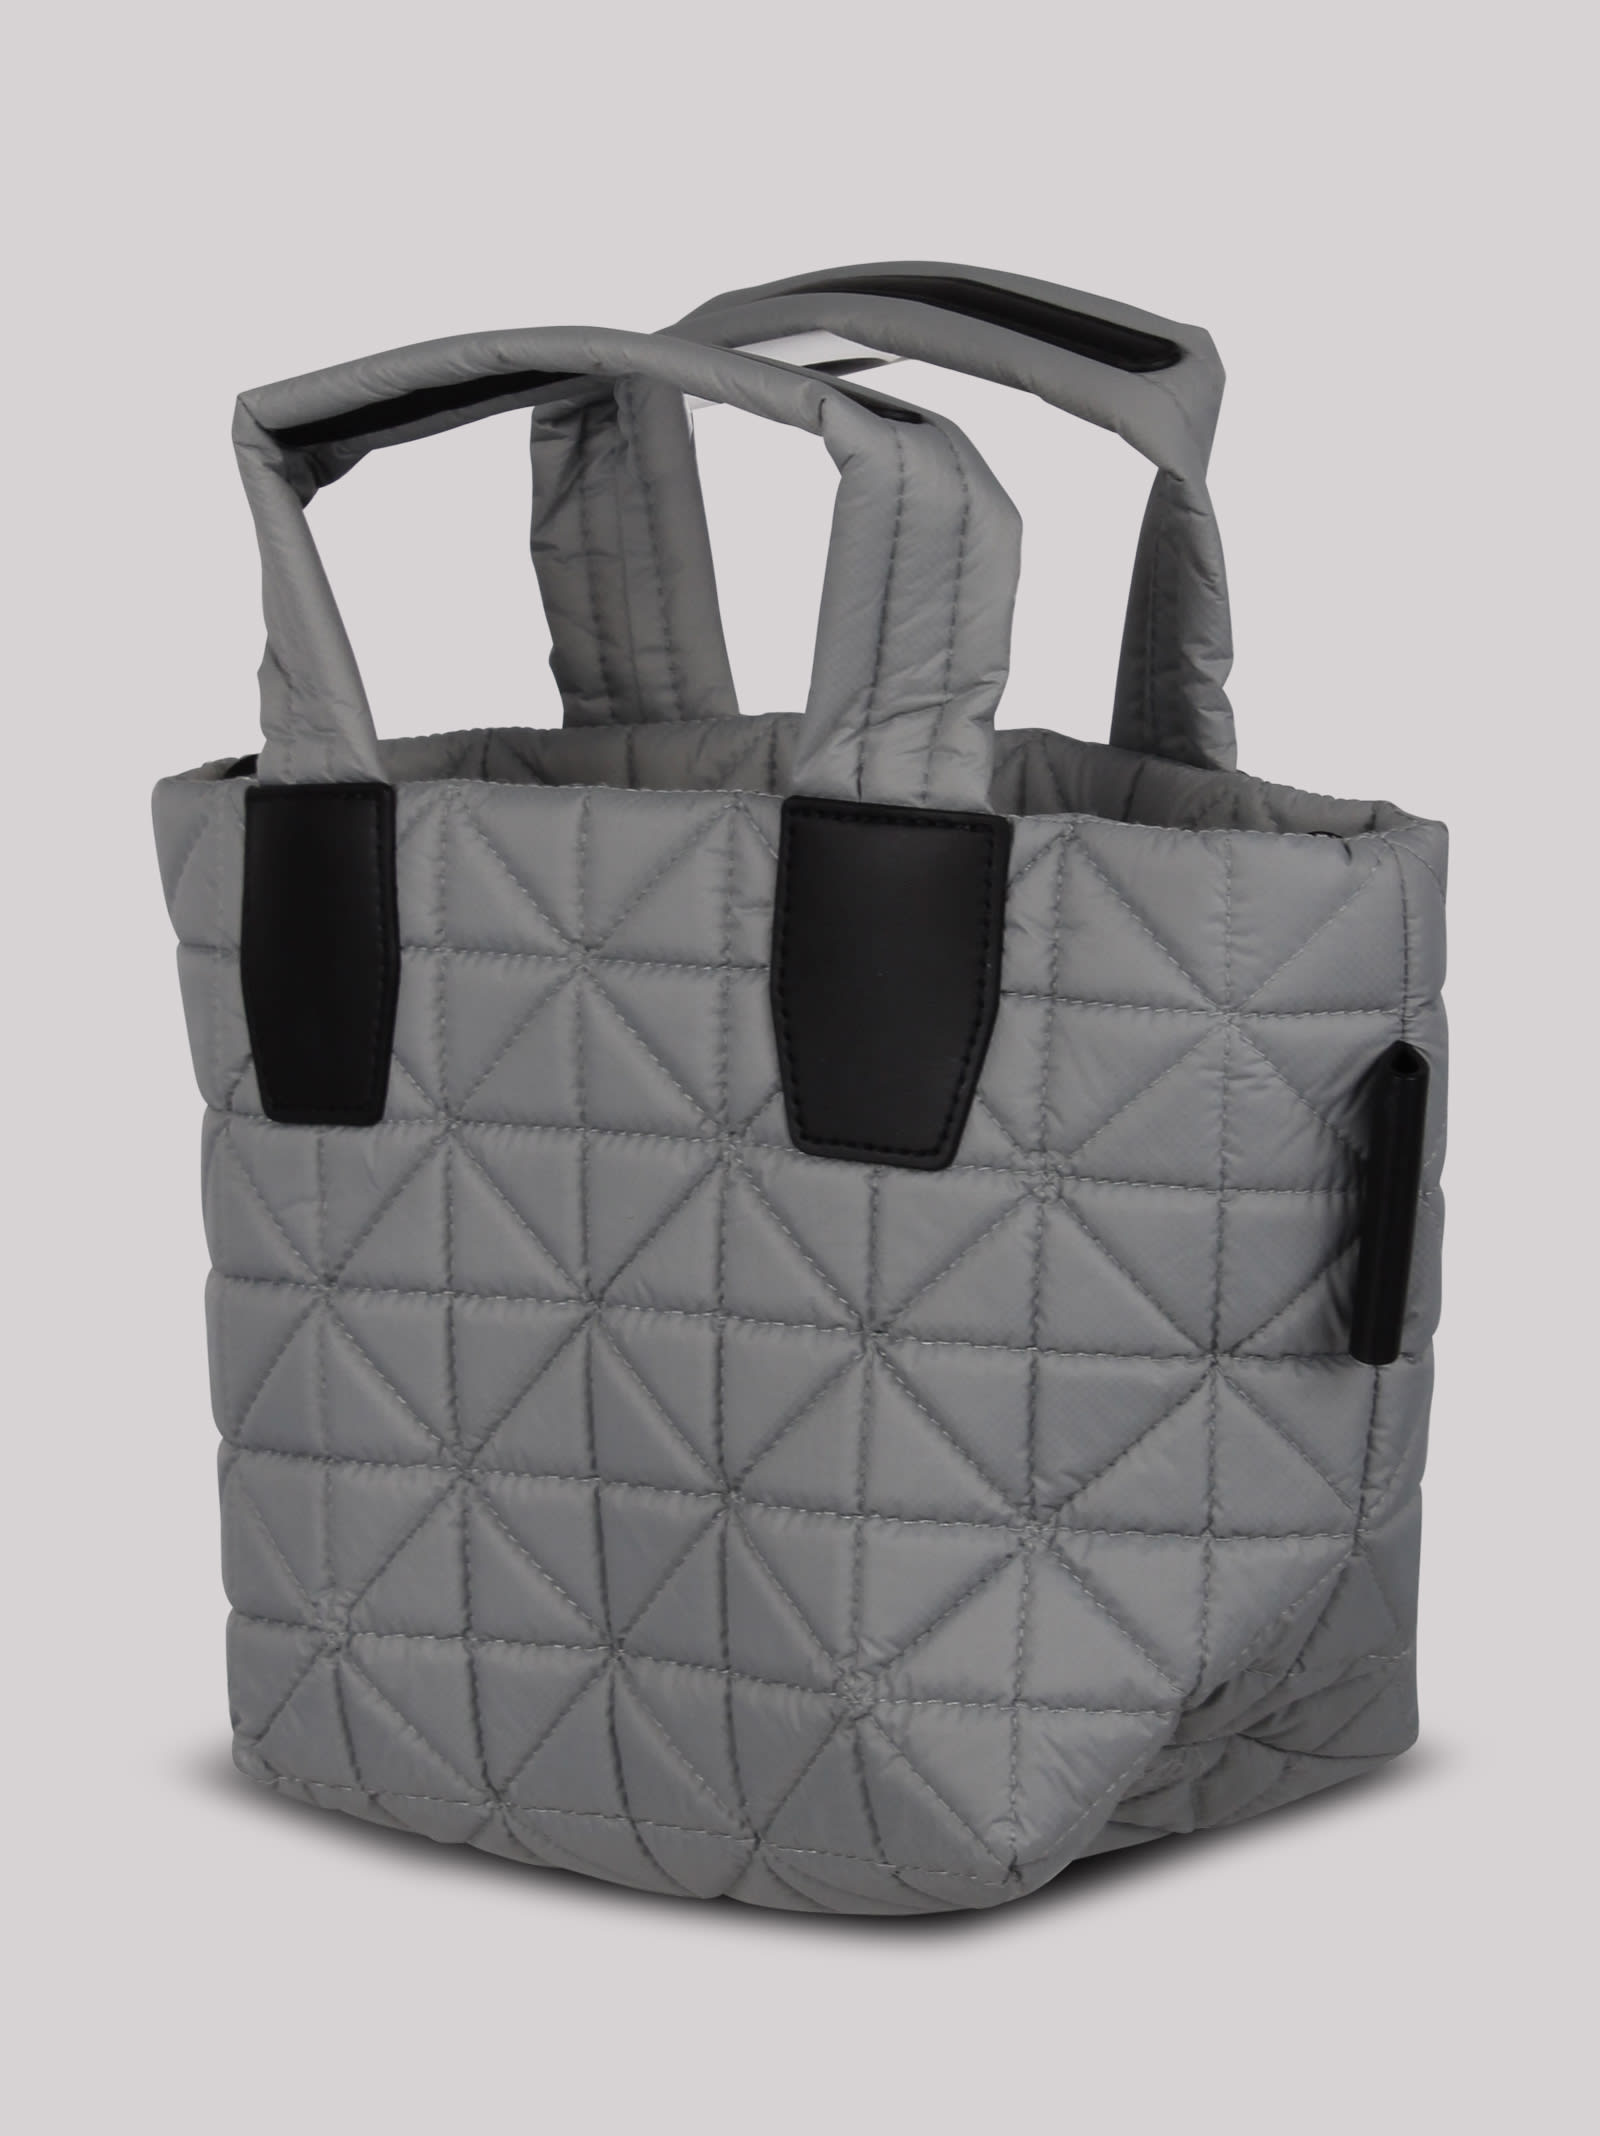 Shop Veecollective Vee Collective Small Vee Padded Tote Bag